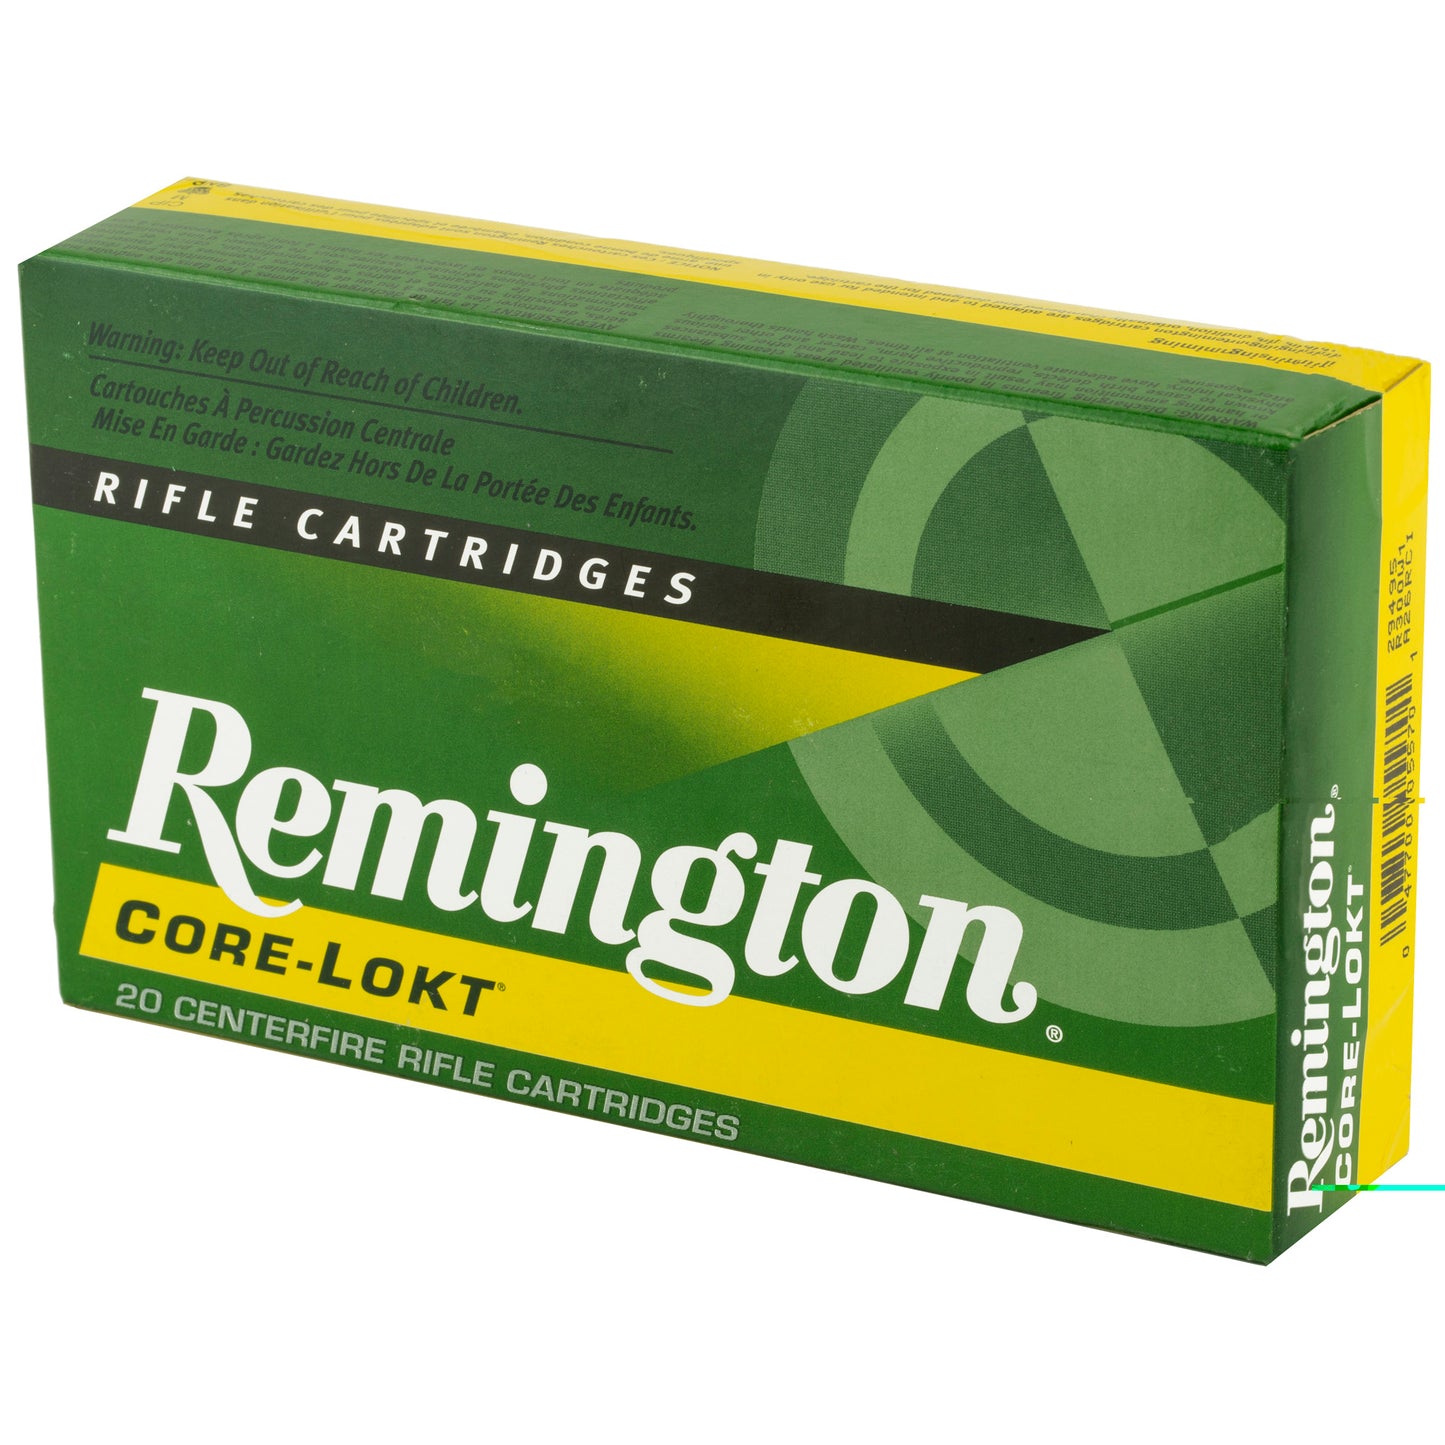 Remington, Core Lokt, 300 WIN MAG, 150 Grain, Pointed Soft Point, 20 Round Box